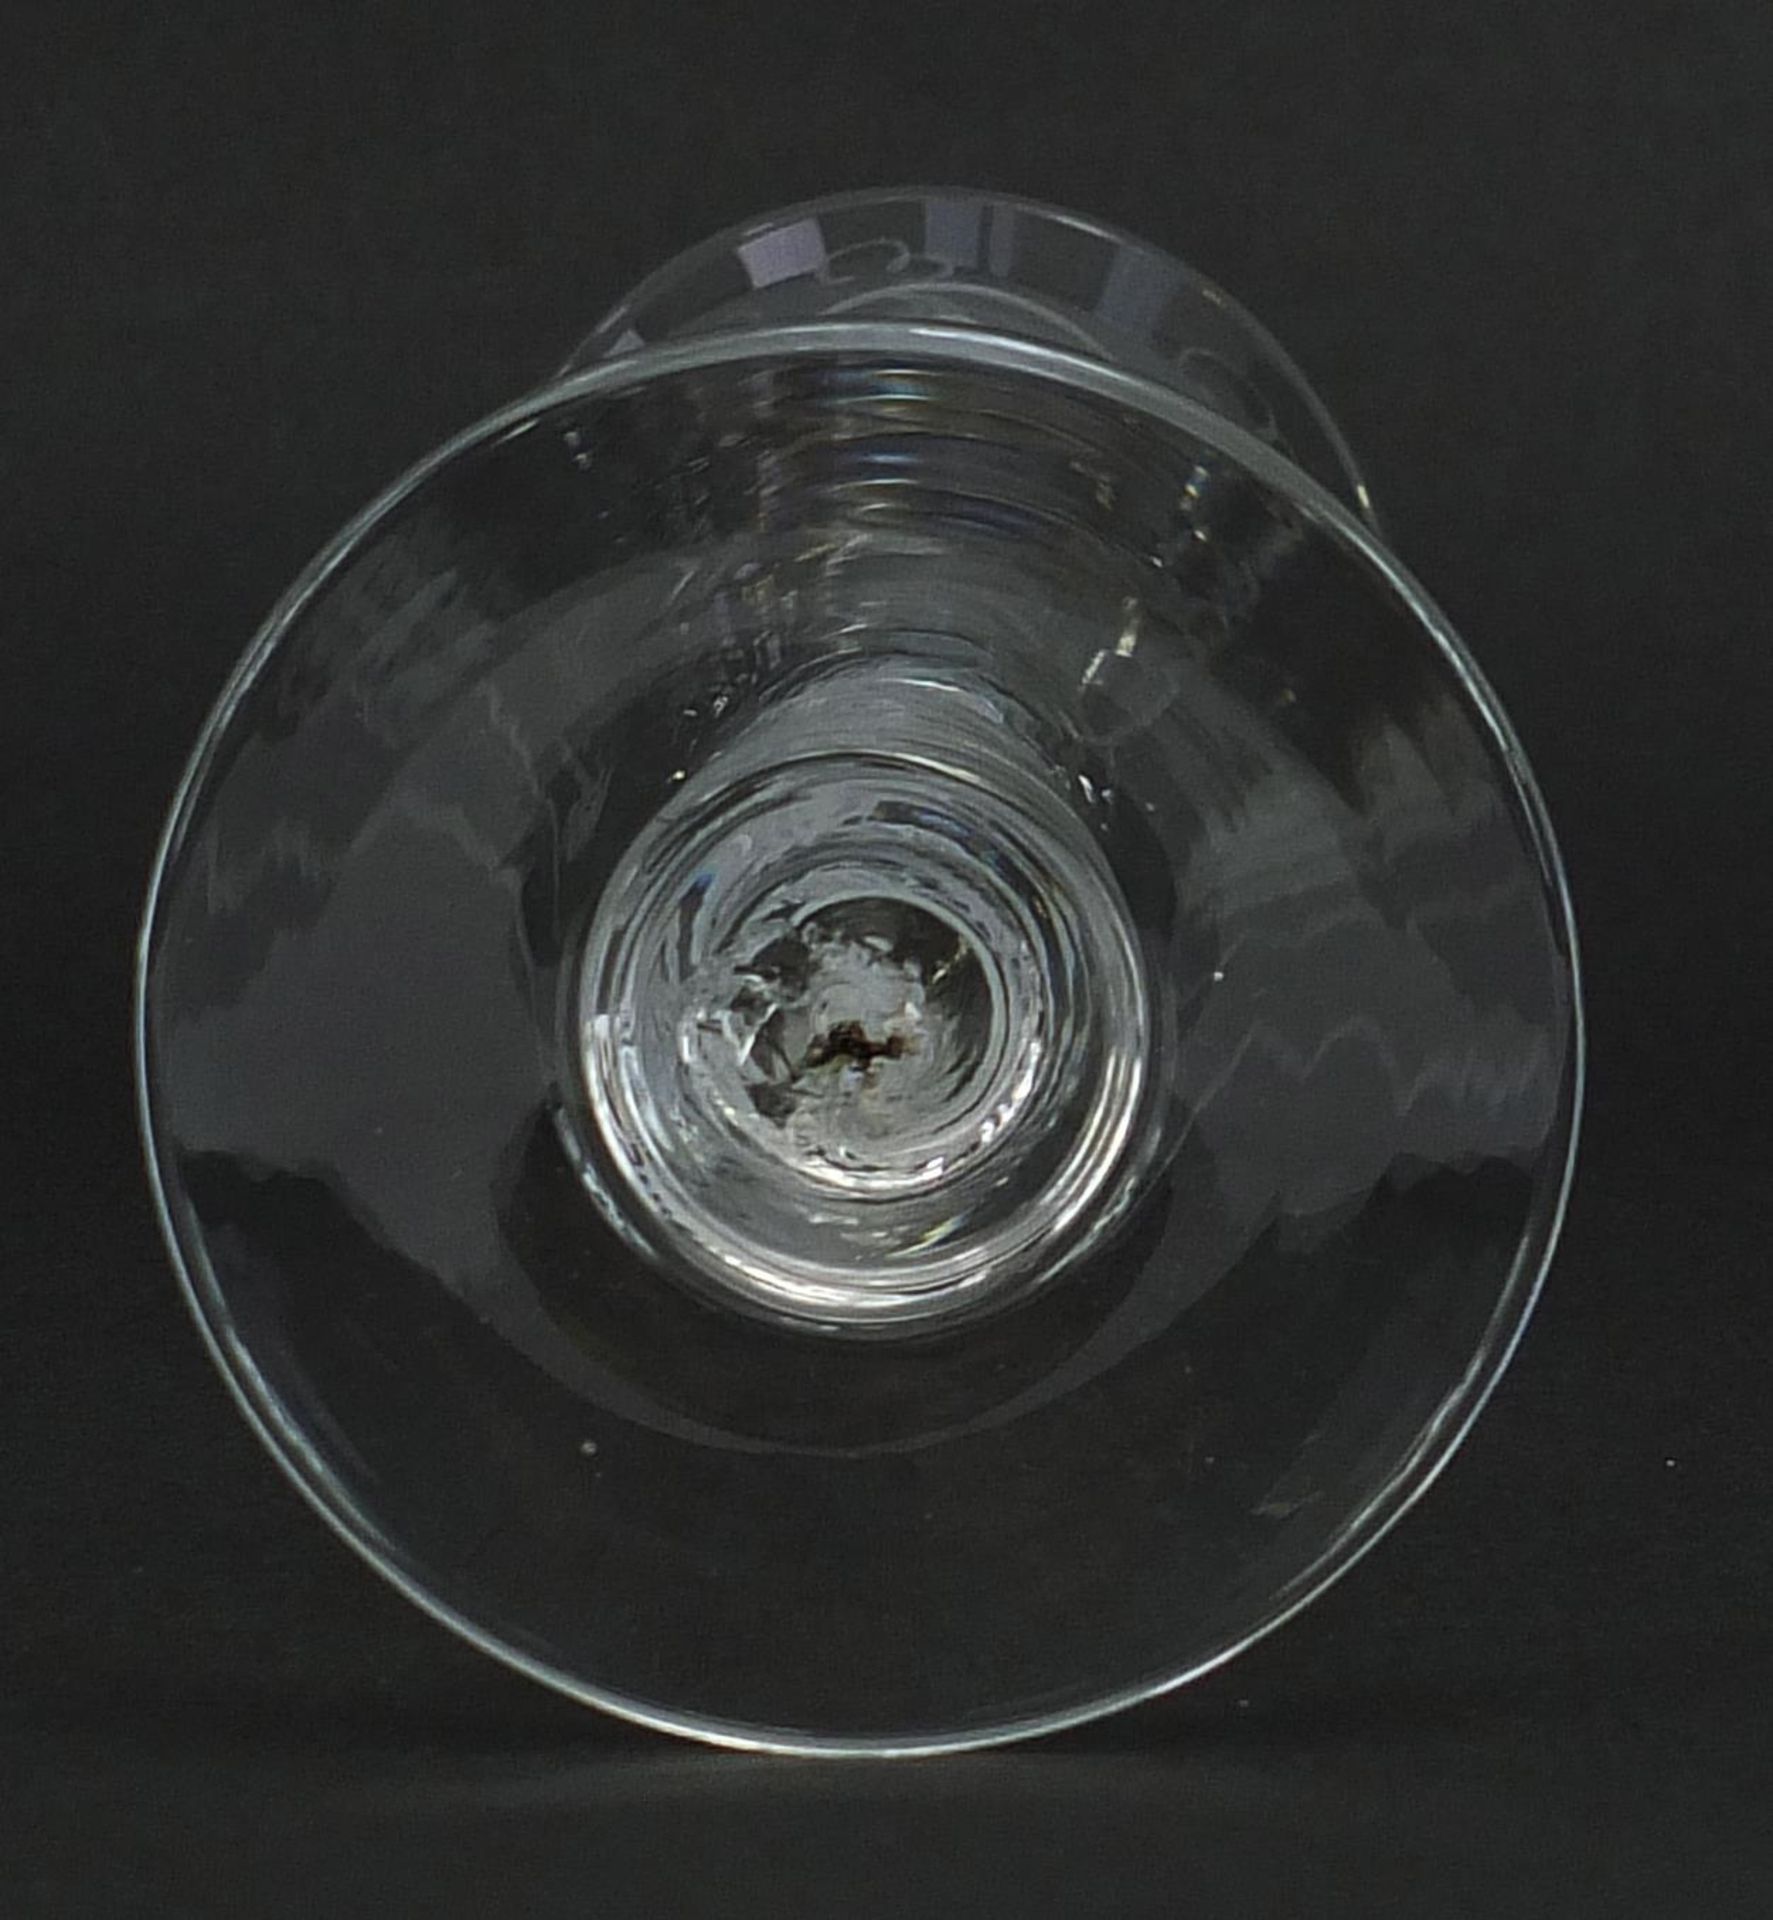 18th century style wine glass with air twist stem and etched bowl, 15.5cm high - Image 3 of 3